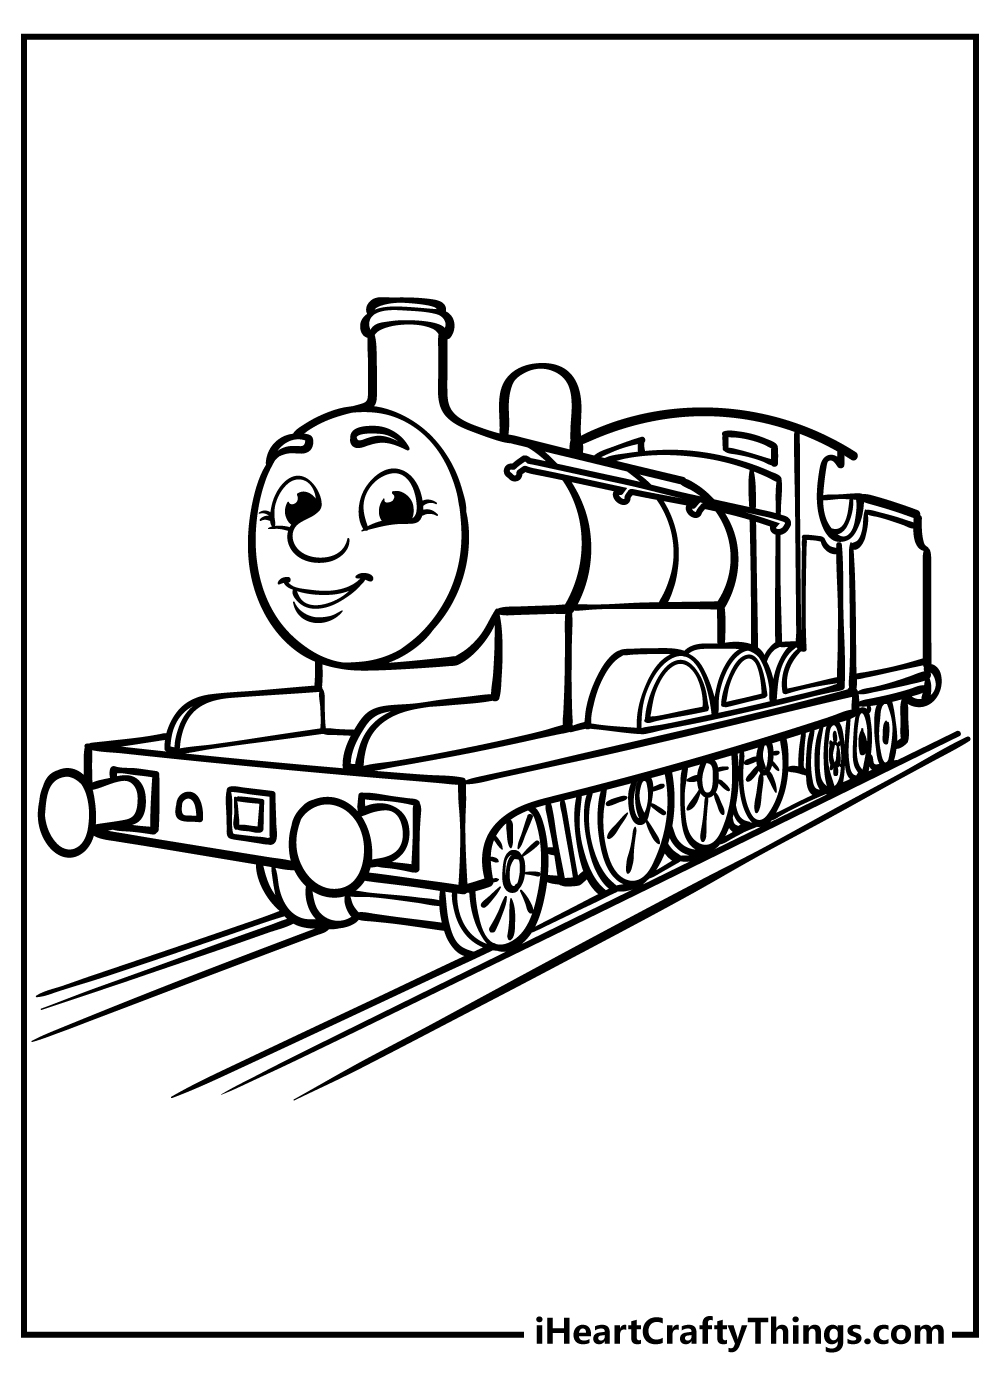 Thomas the train coloring pages free printables